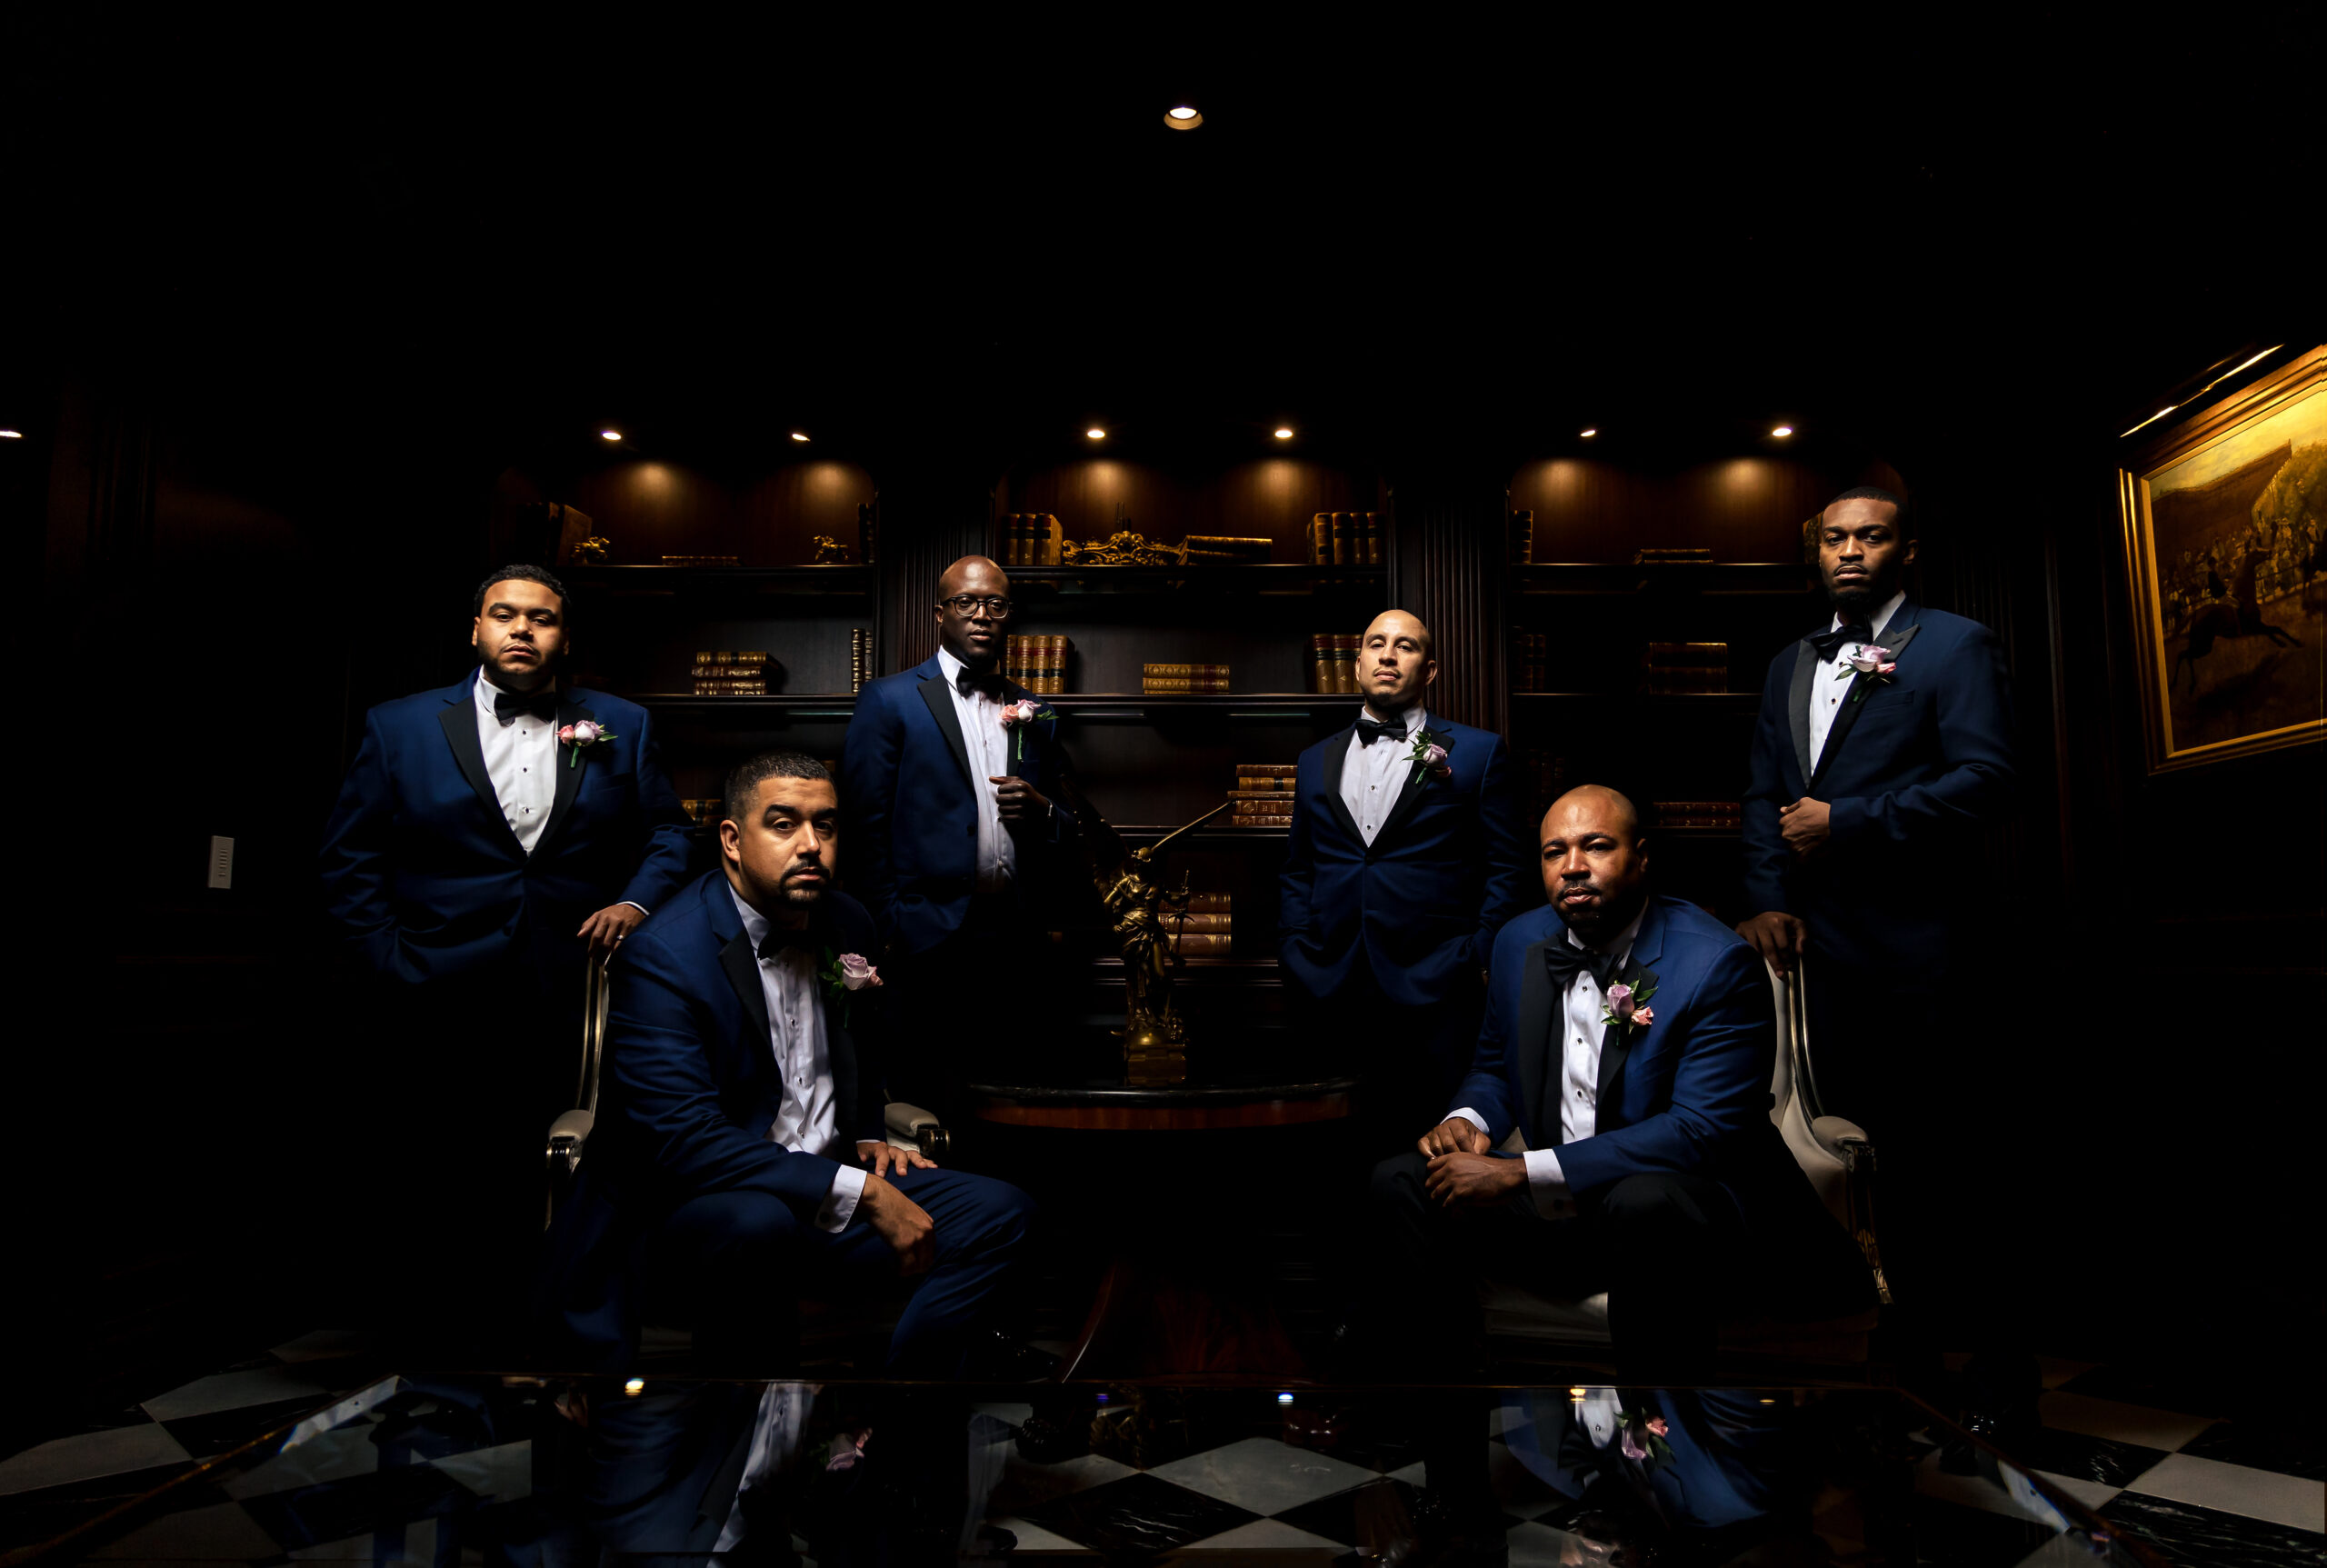 Intriguing creative portraits of the groom and groomsmen captured in the elegant library of the Park Chateau Estate and Gardens. The sophisticated setting and composition were artfully photographed by North Jersey wedding photographer Jarot Bocanegra